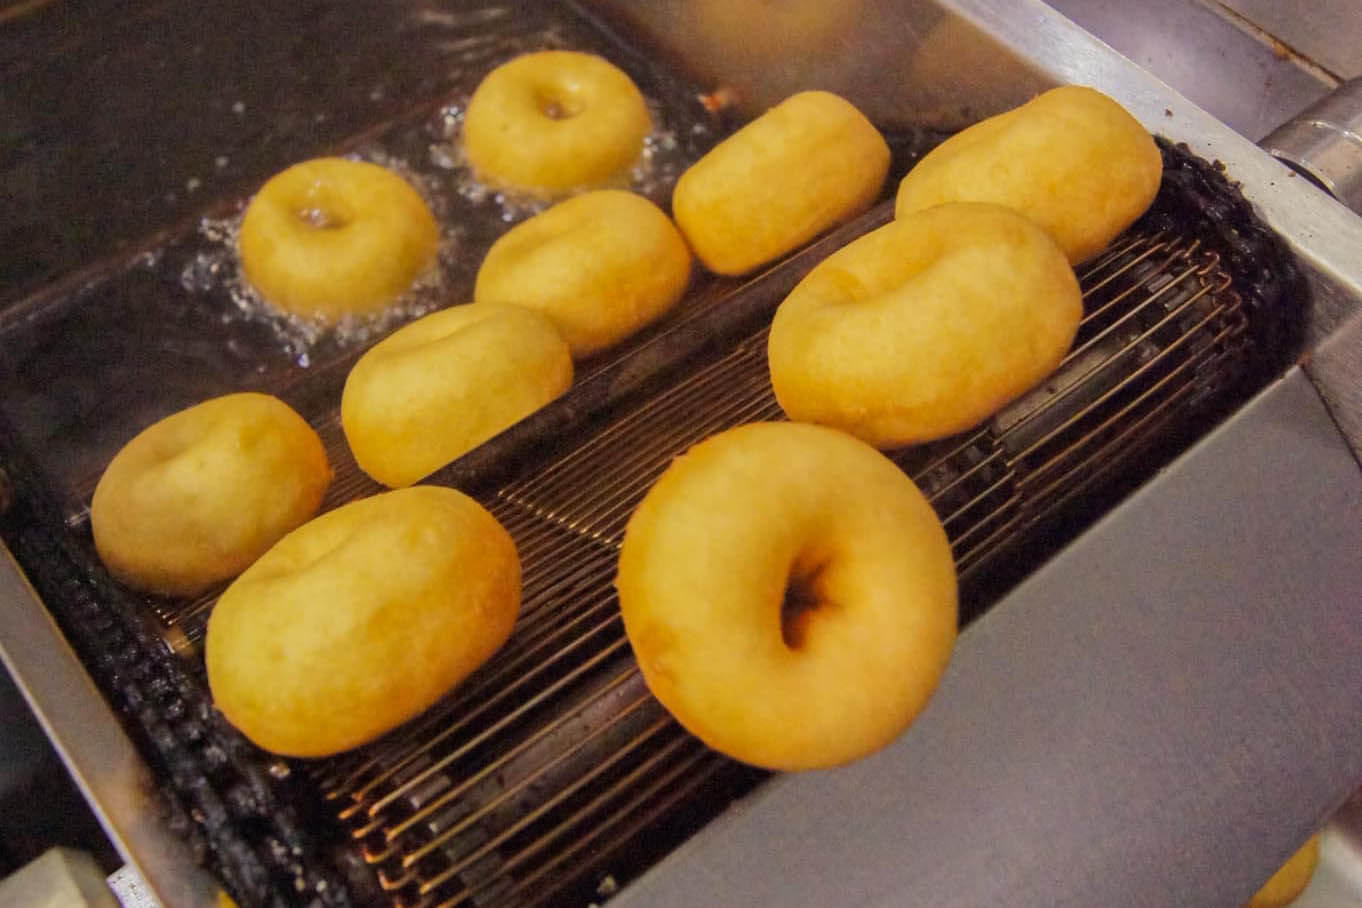 Donuts being made at Charlie's Mini Donut Shop.